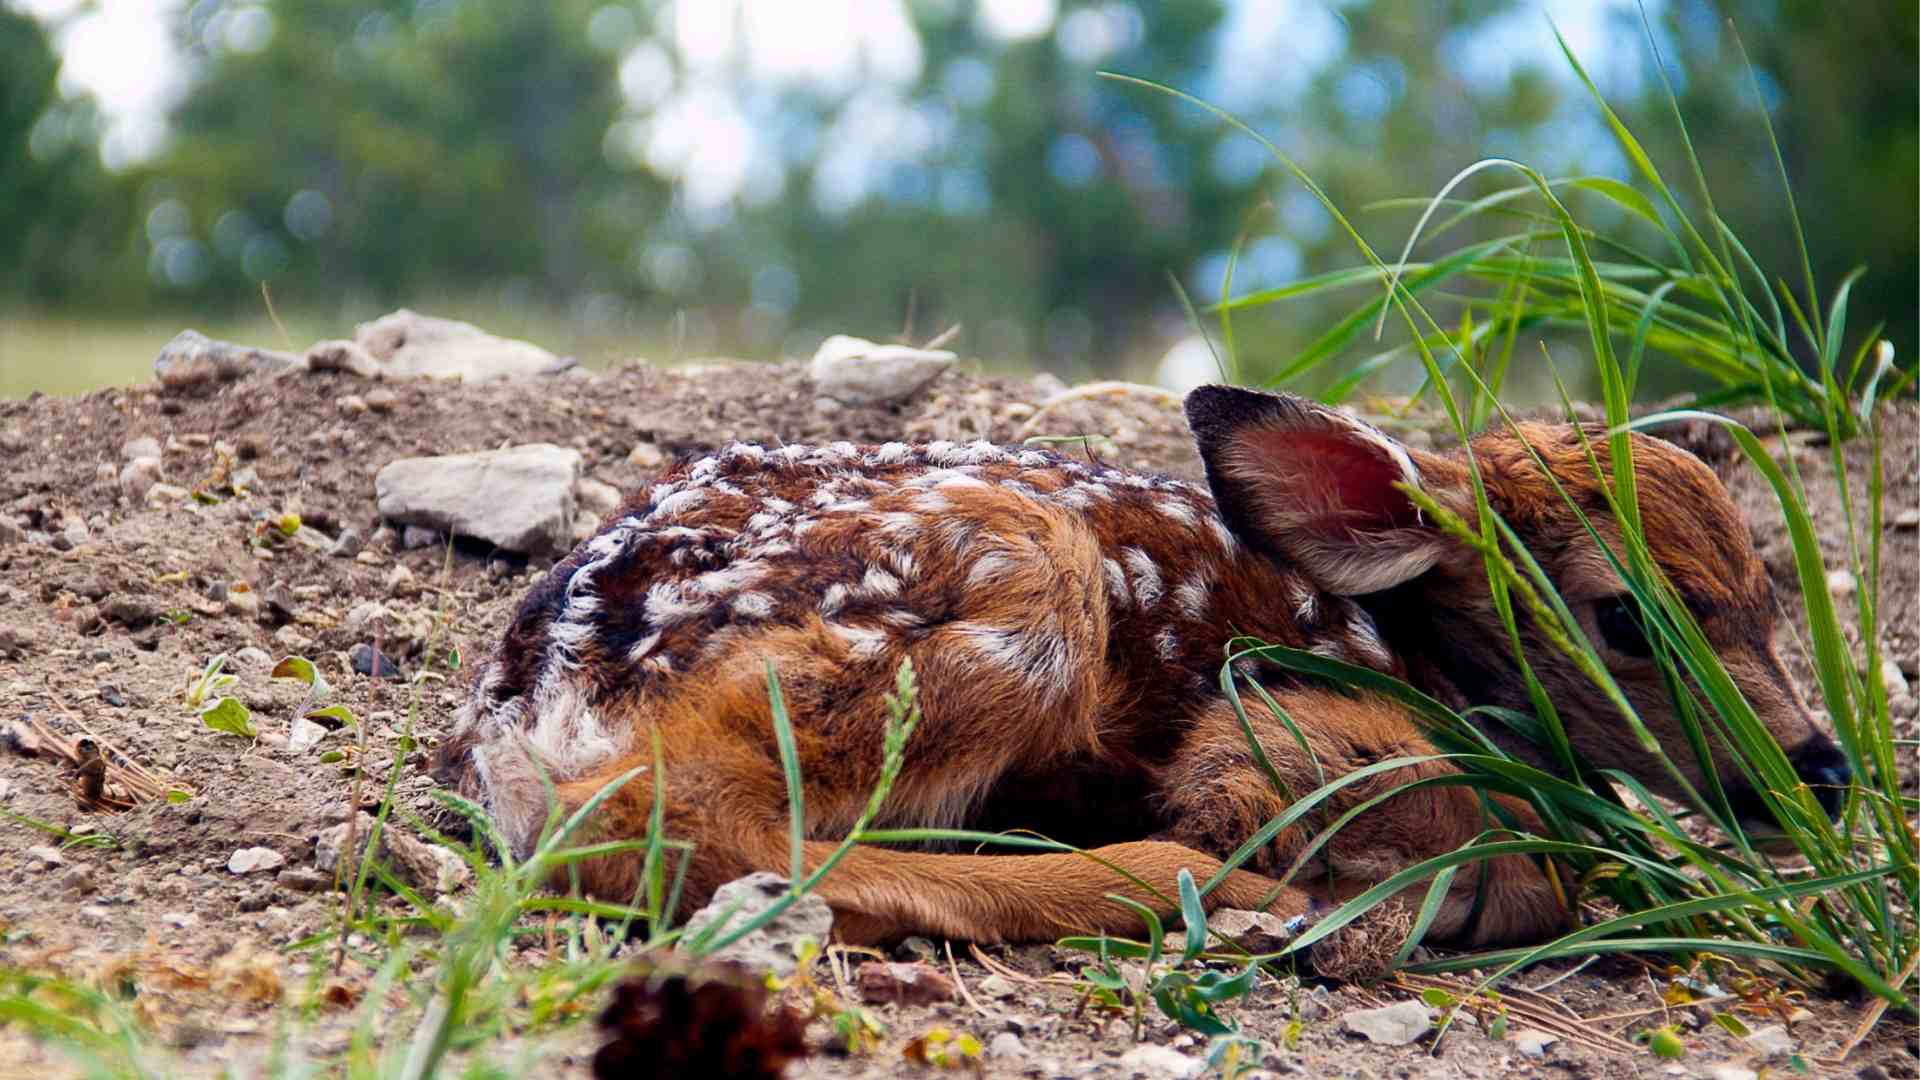 a fawn in the wild hiding